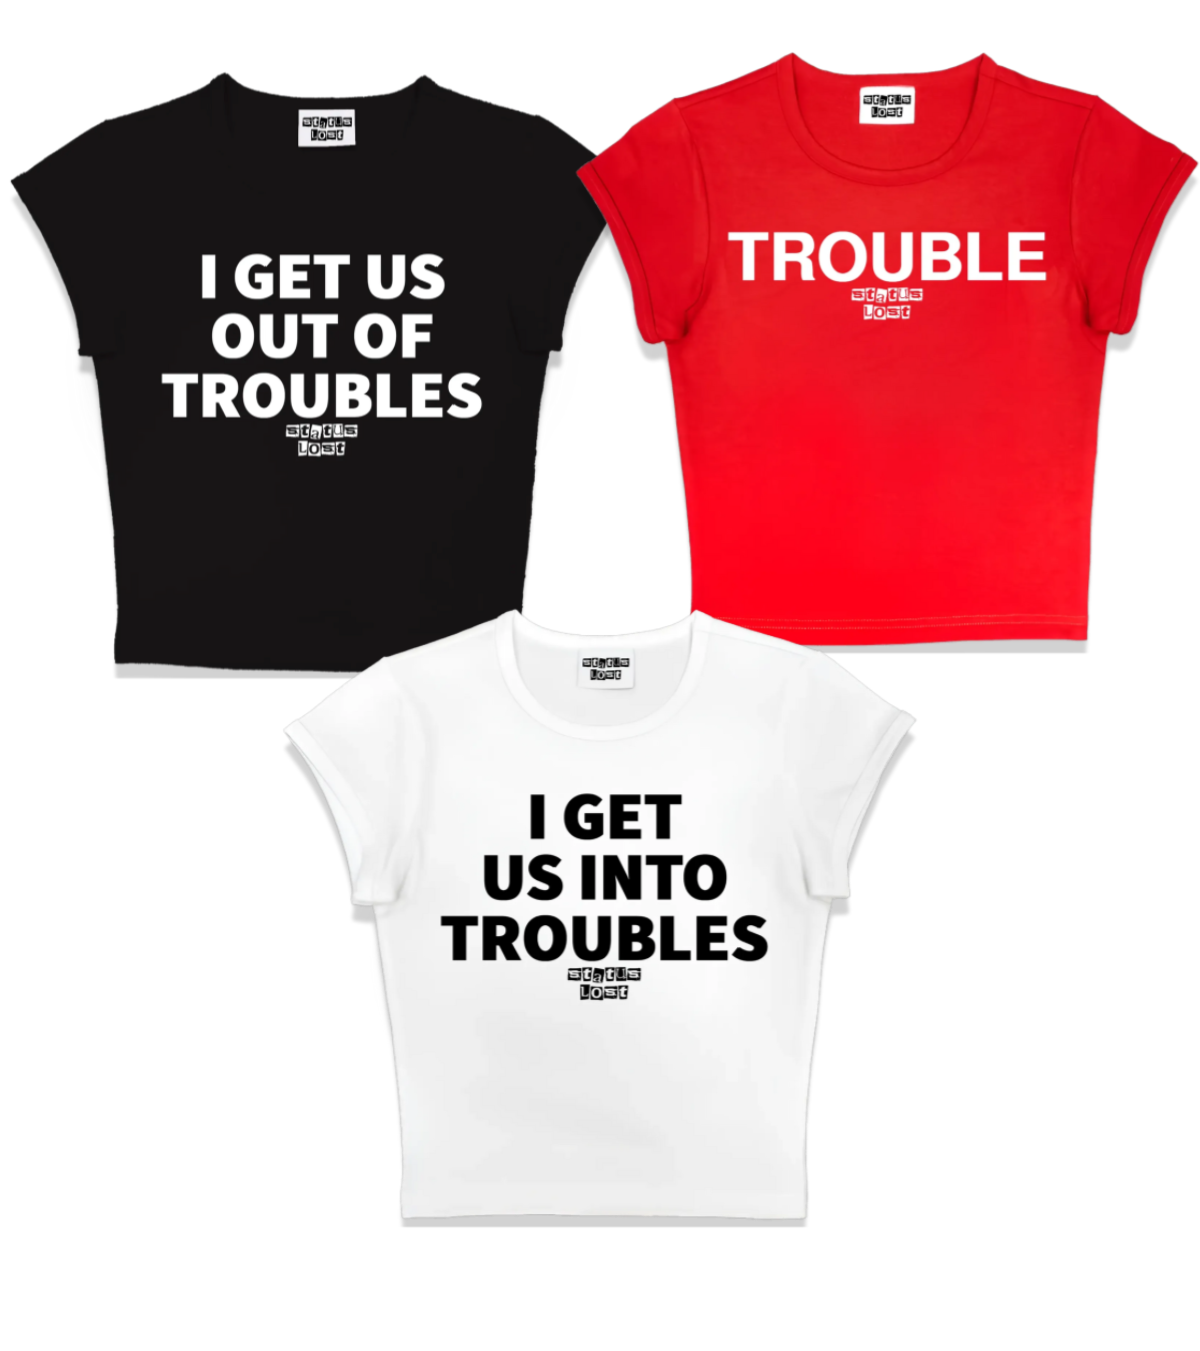 “I Get Us Into Troubles” & “Trouble” and “Out of Troubles” Matching Trio